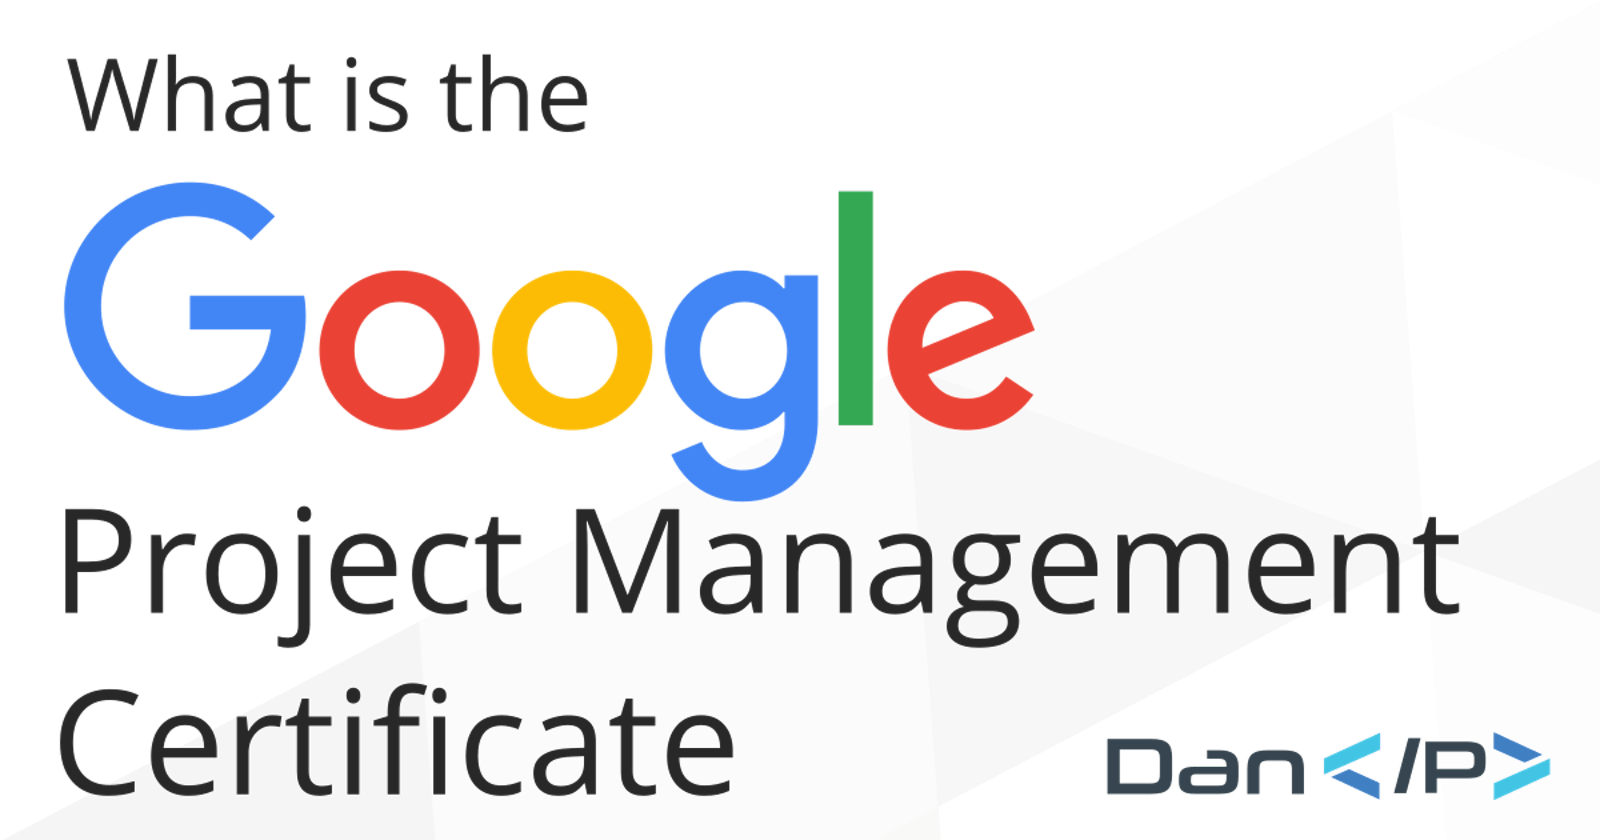 What Is The Google Project Management Certificate?